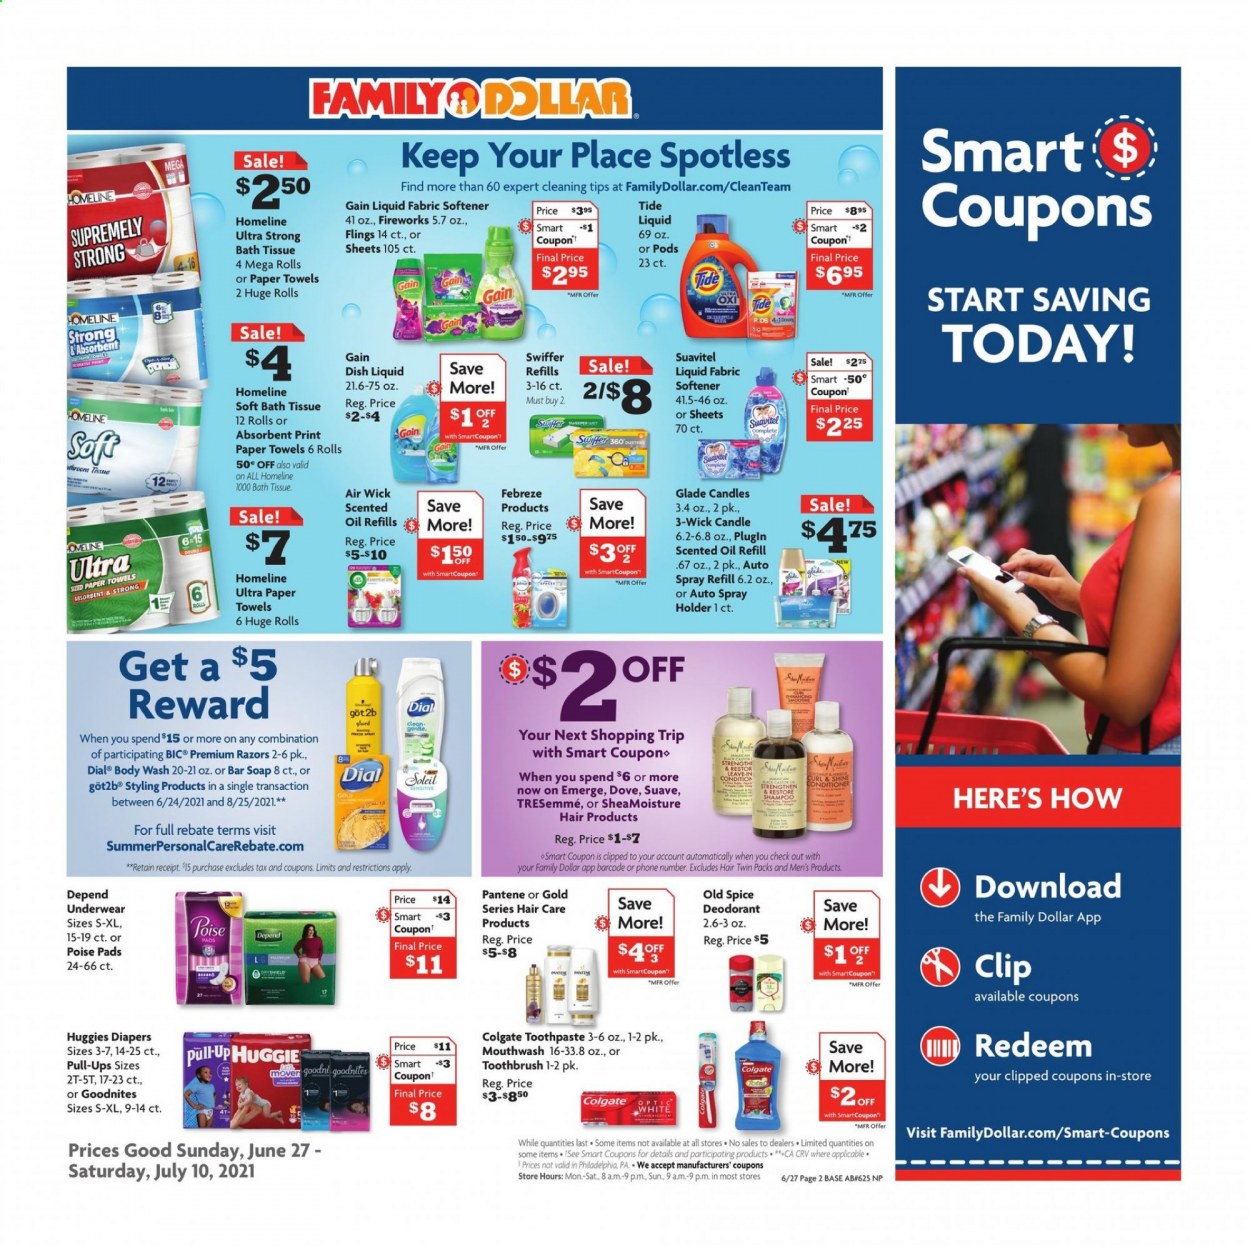 thumbnail - Family Dollar Flyer - 06/27/2021 - 07/10/2021 - Sales products - spice, oil, Huggies, nappies, Dove, bath tissue, kitchen towels, paper towels, Febreze, Gain, Swiffer, Tide, fabric softener, dishwashing liquid, body wash, shampoo, Suave, Old Spice, soap bar, Dial, soap, Colgate, toothbrush, toothpaste, mouthwash, conditioner, TRESemmé, Pantene, anti-perspirant, deodorant, holder, candle, Air Wick, Glade, scented oil. Page 3.